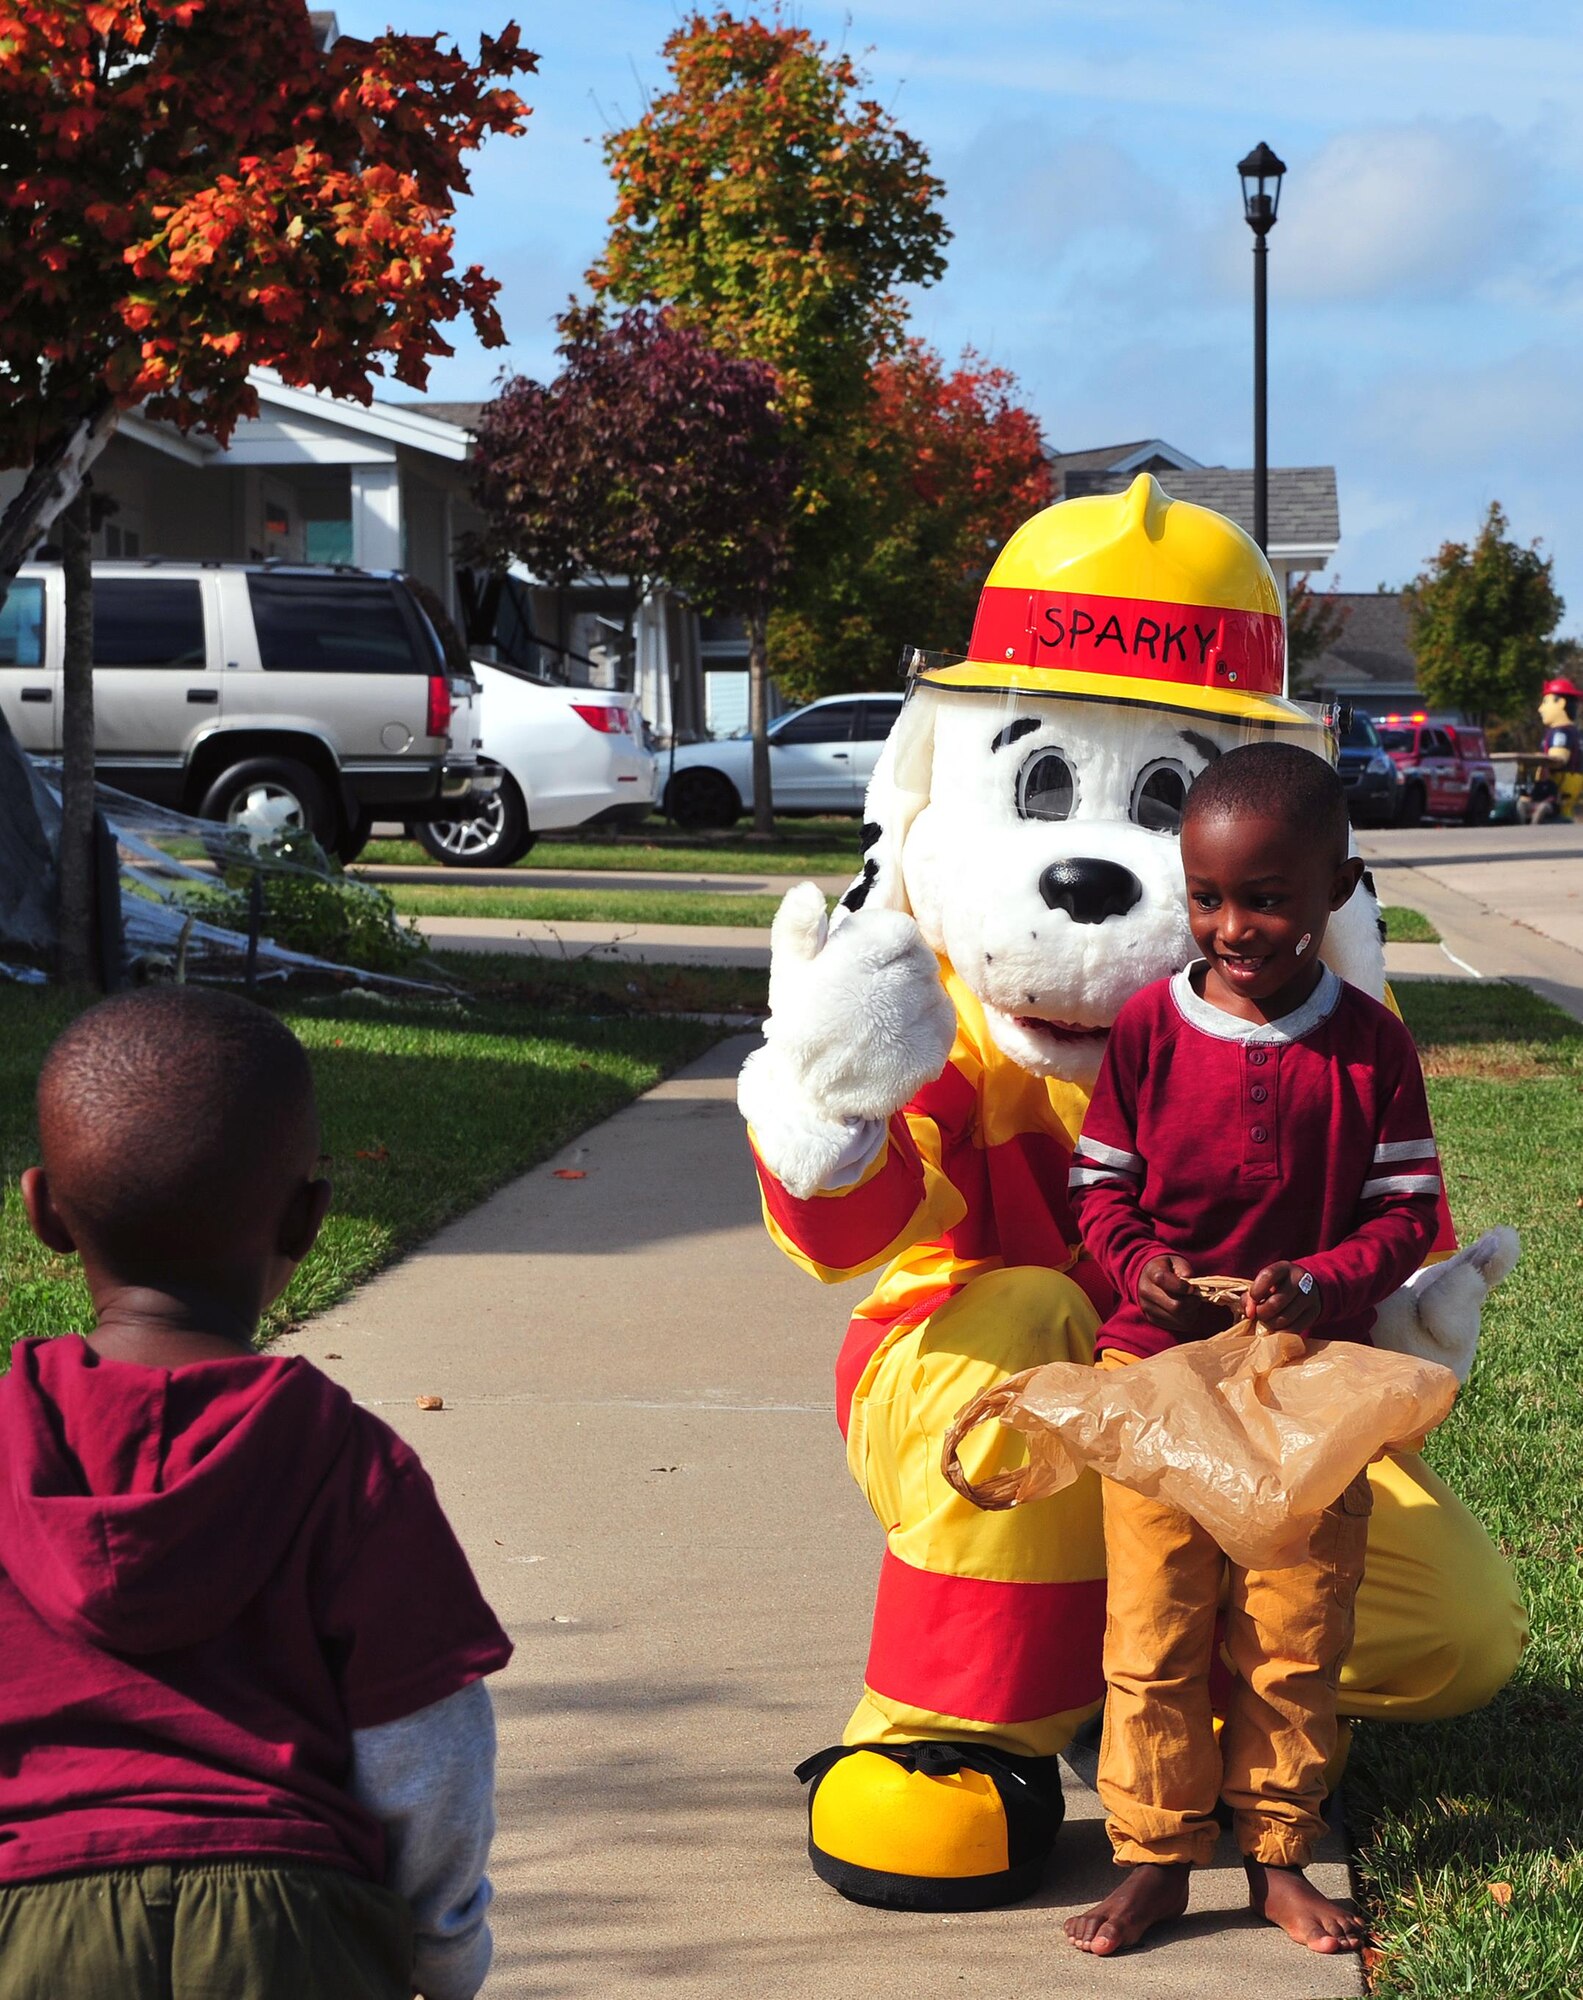 Spark the Dog, a fire prevention mascot, hugs a Whiteman youth and awaits another to join for a group photo at Whiteman Air Force Base, Mo., Oct. 15, 2016. Members of Team Whiteman along with the fire prevention mascots met with families and passed candy to youth as part of the parade finale. (U.S. Air Force photo by Senior Airman Jovan Banks)